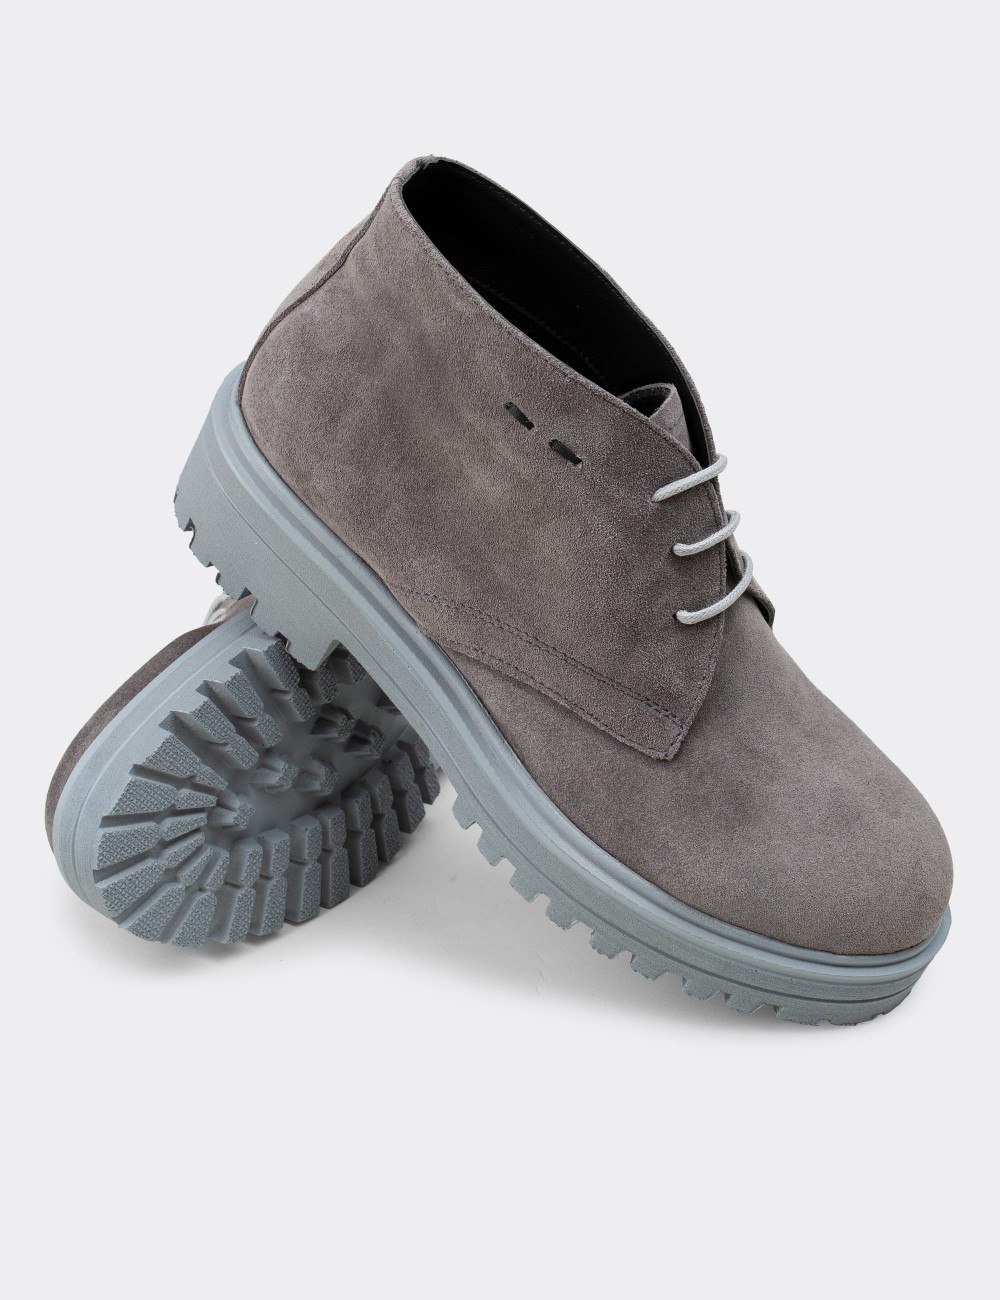 Gray Suede Leather Desert Boots - 01847ZGRIE01